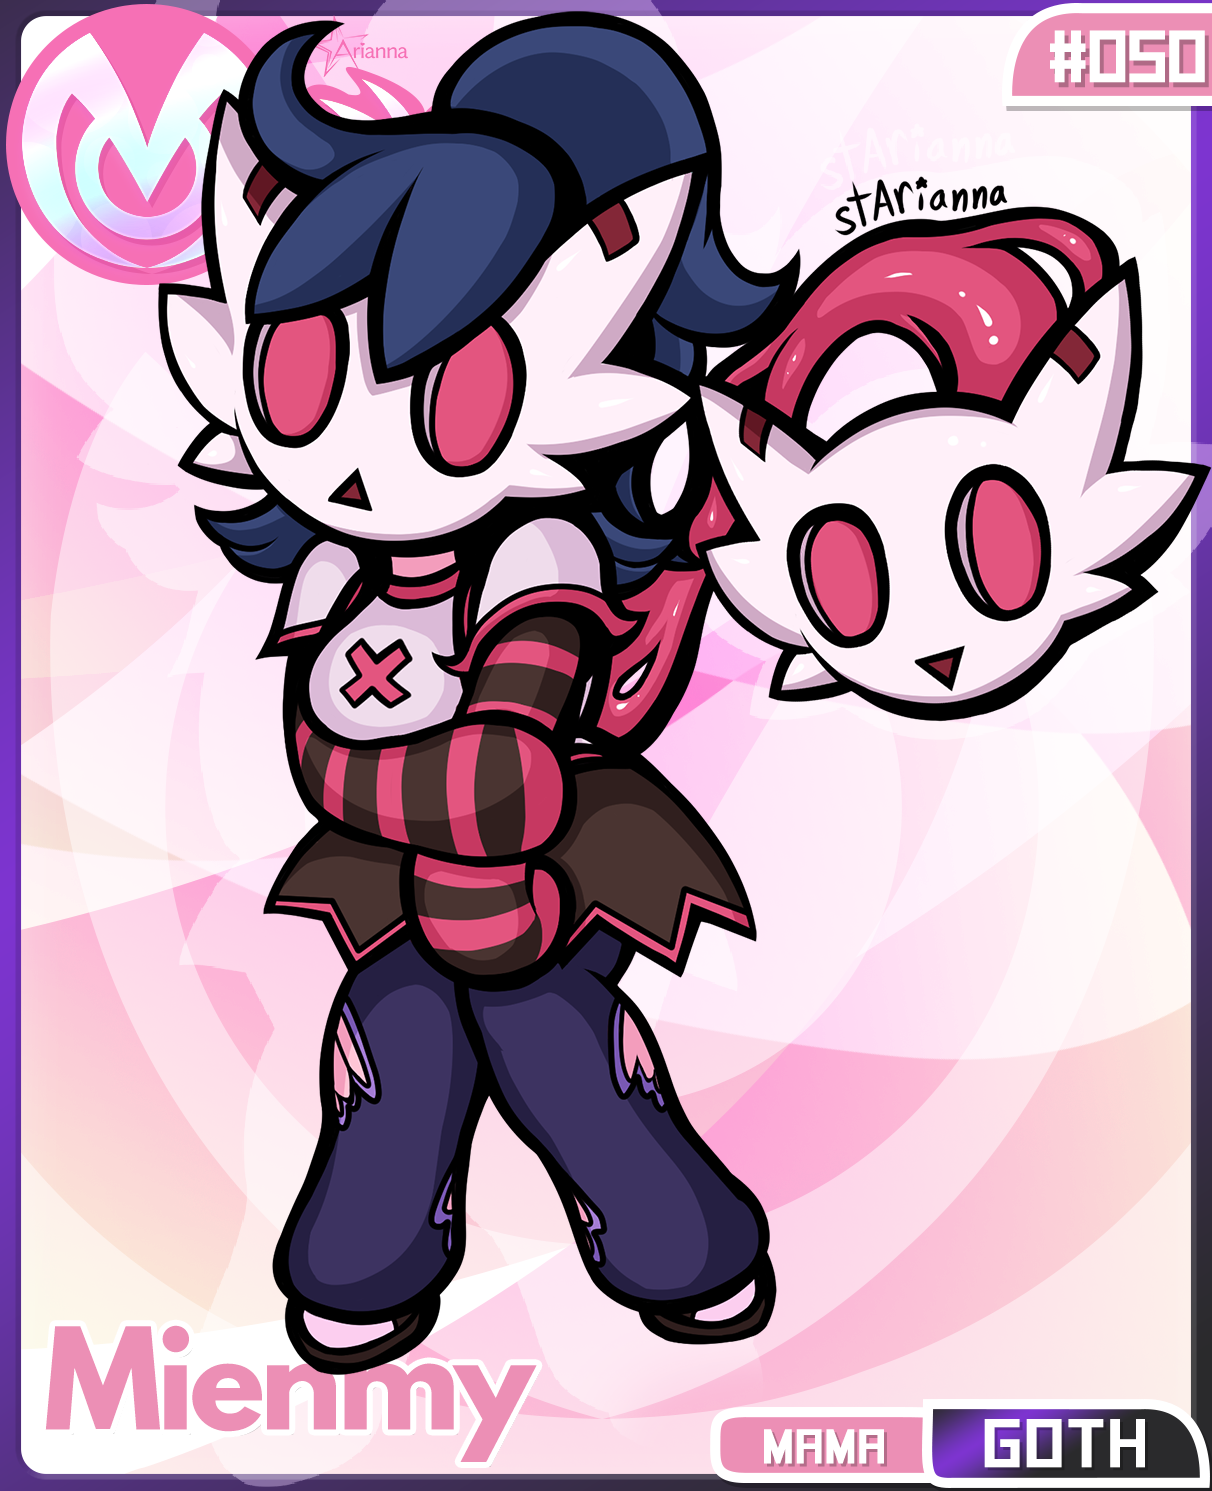 Mienmy, Monommy #050, a mama class goth-type